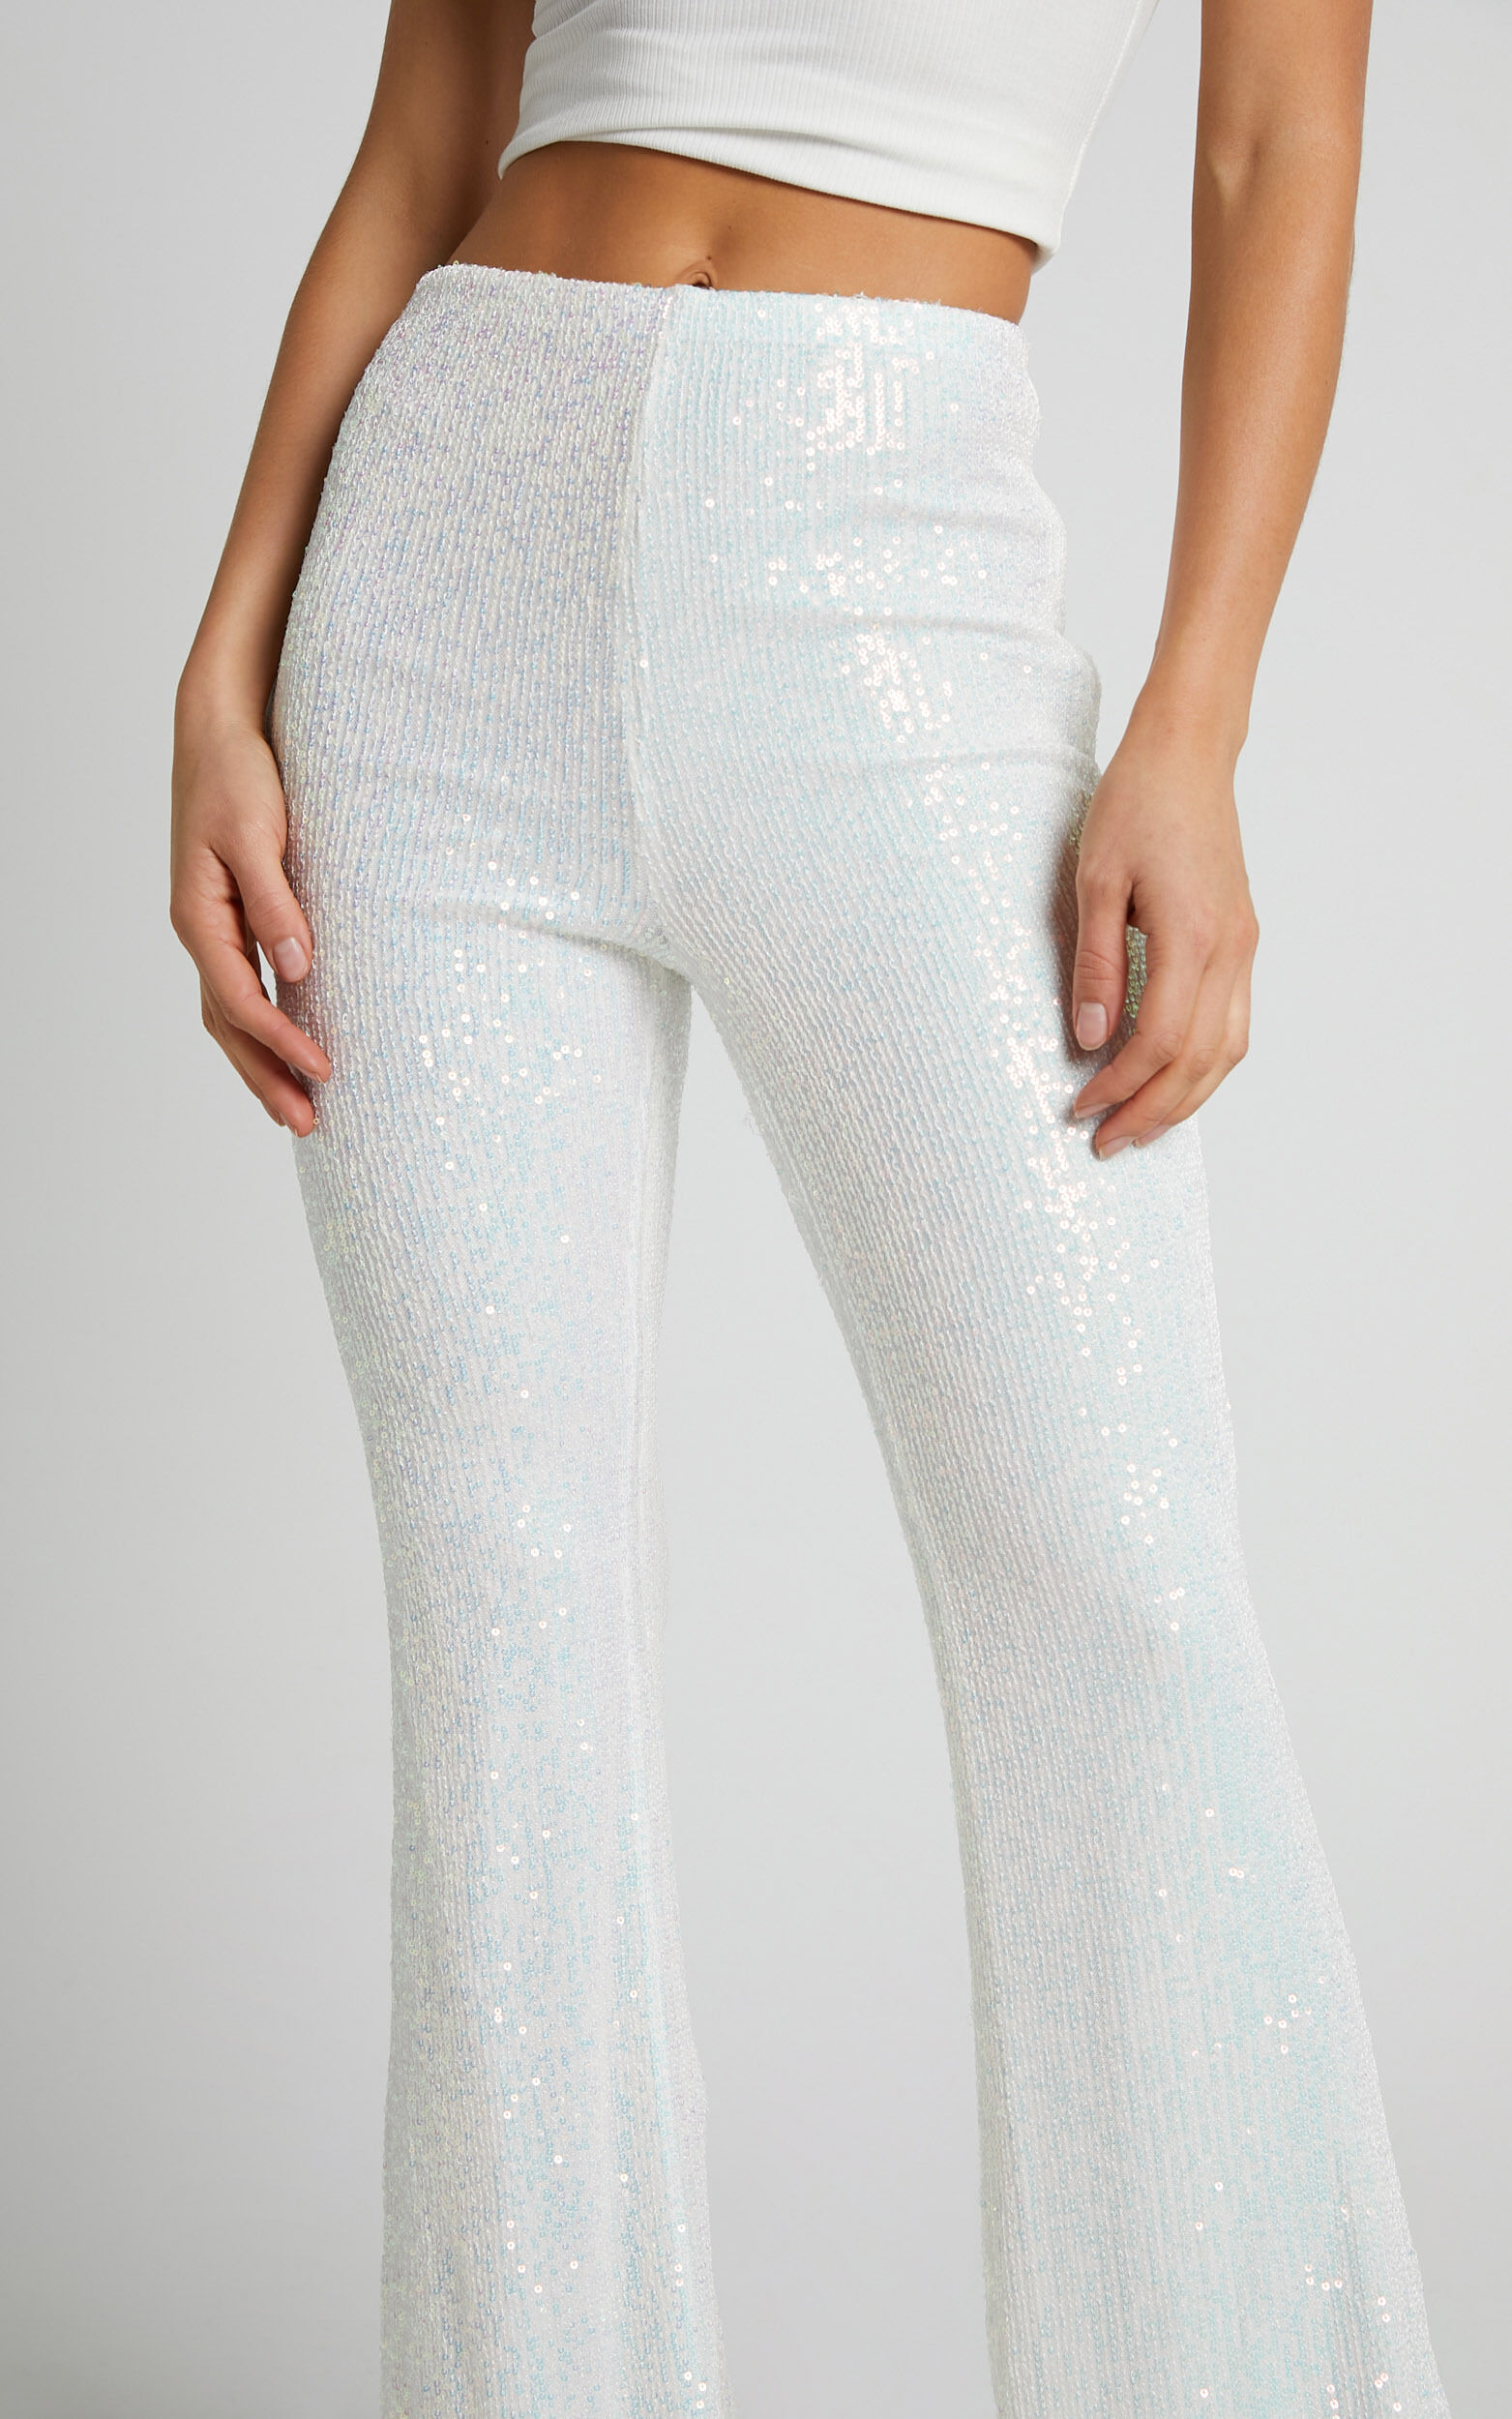 Sequin Flare Pants